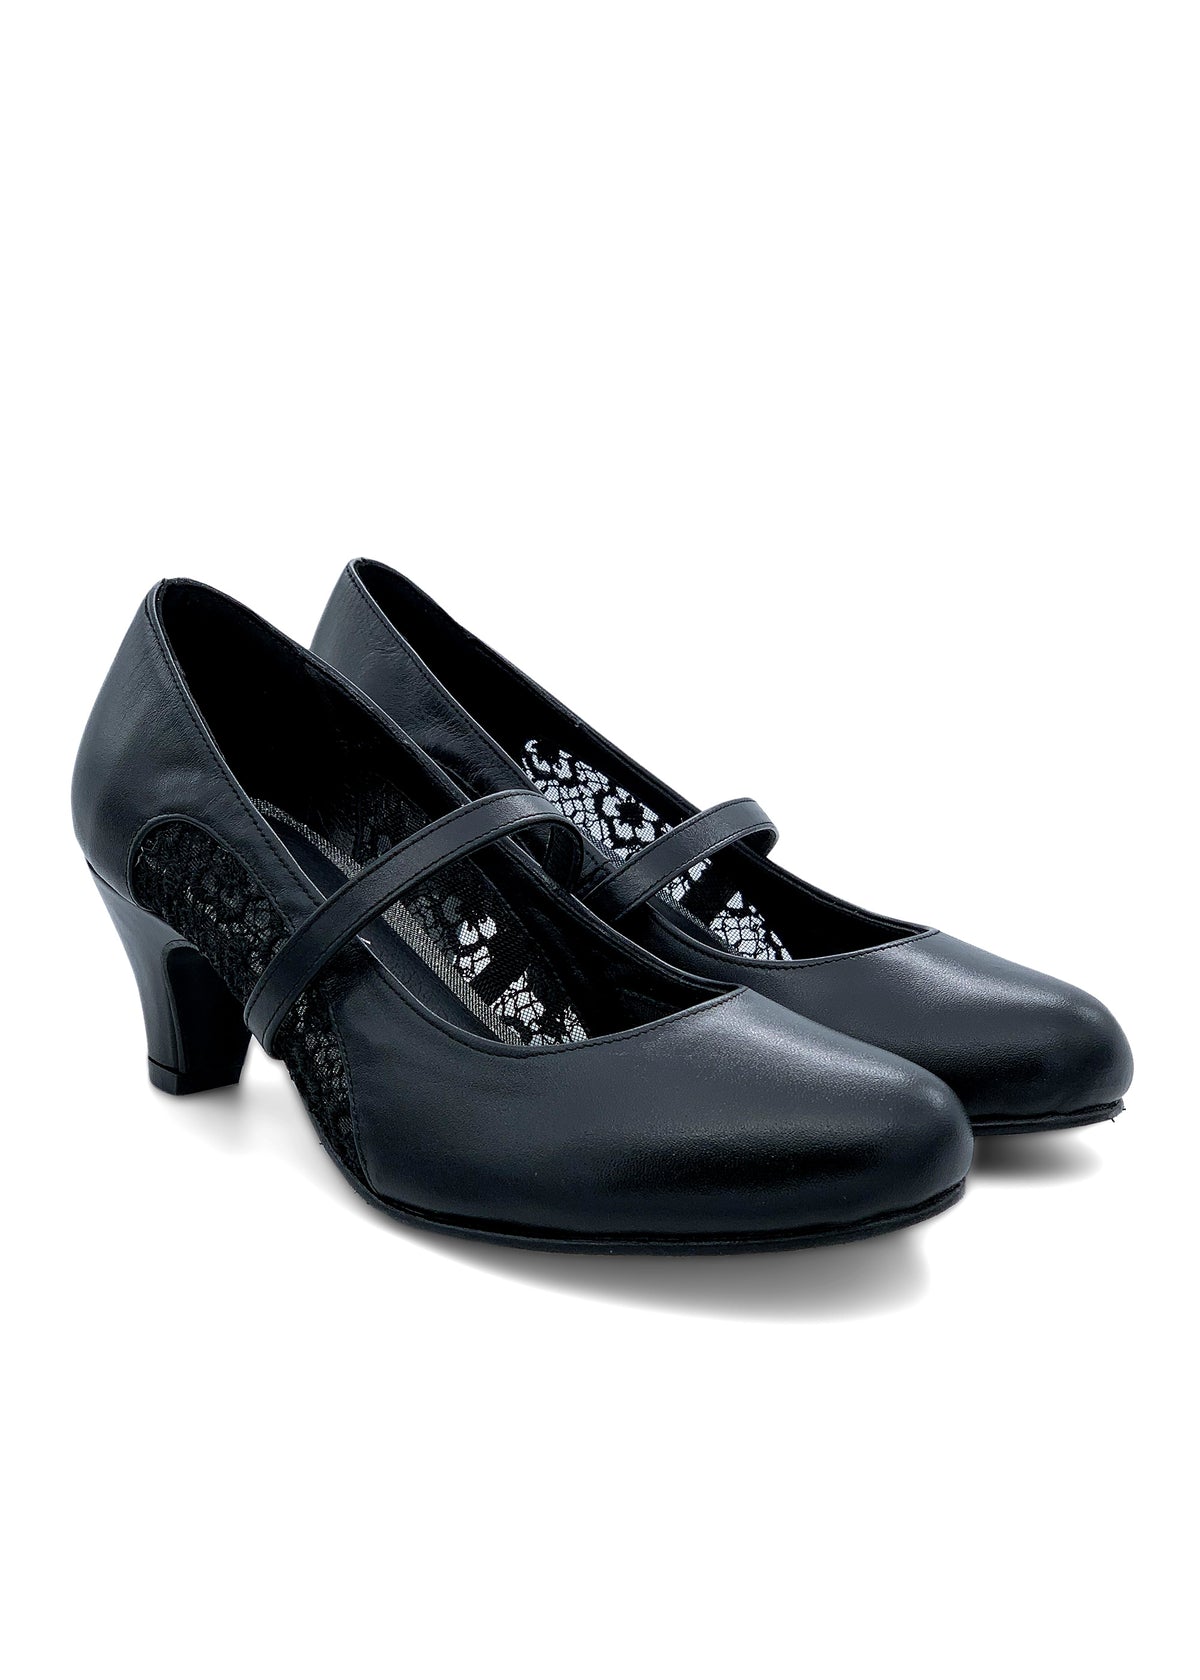 Open-toed shoes with lace edges - black